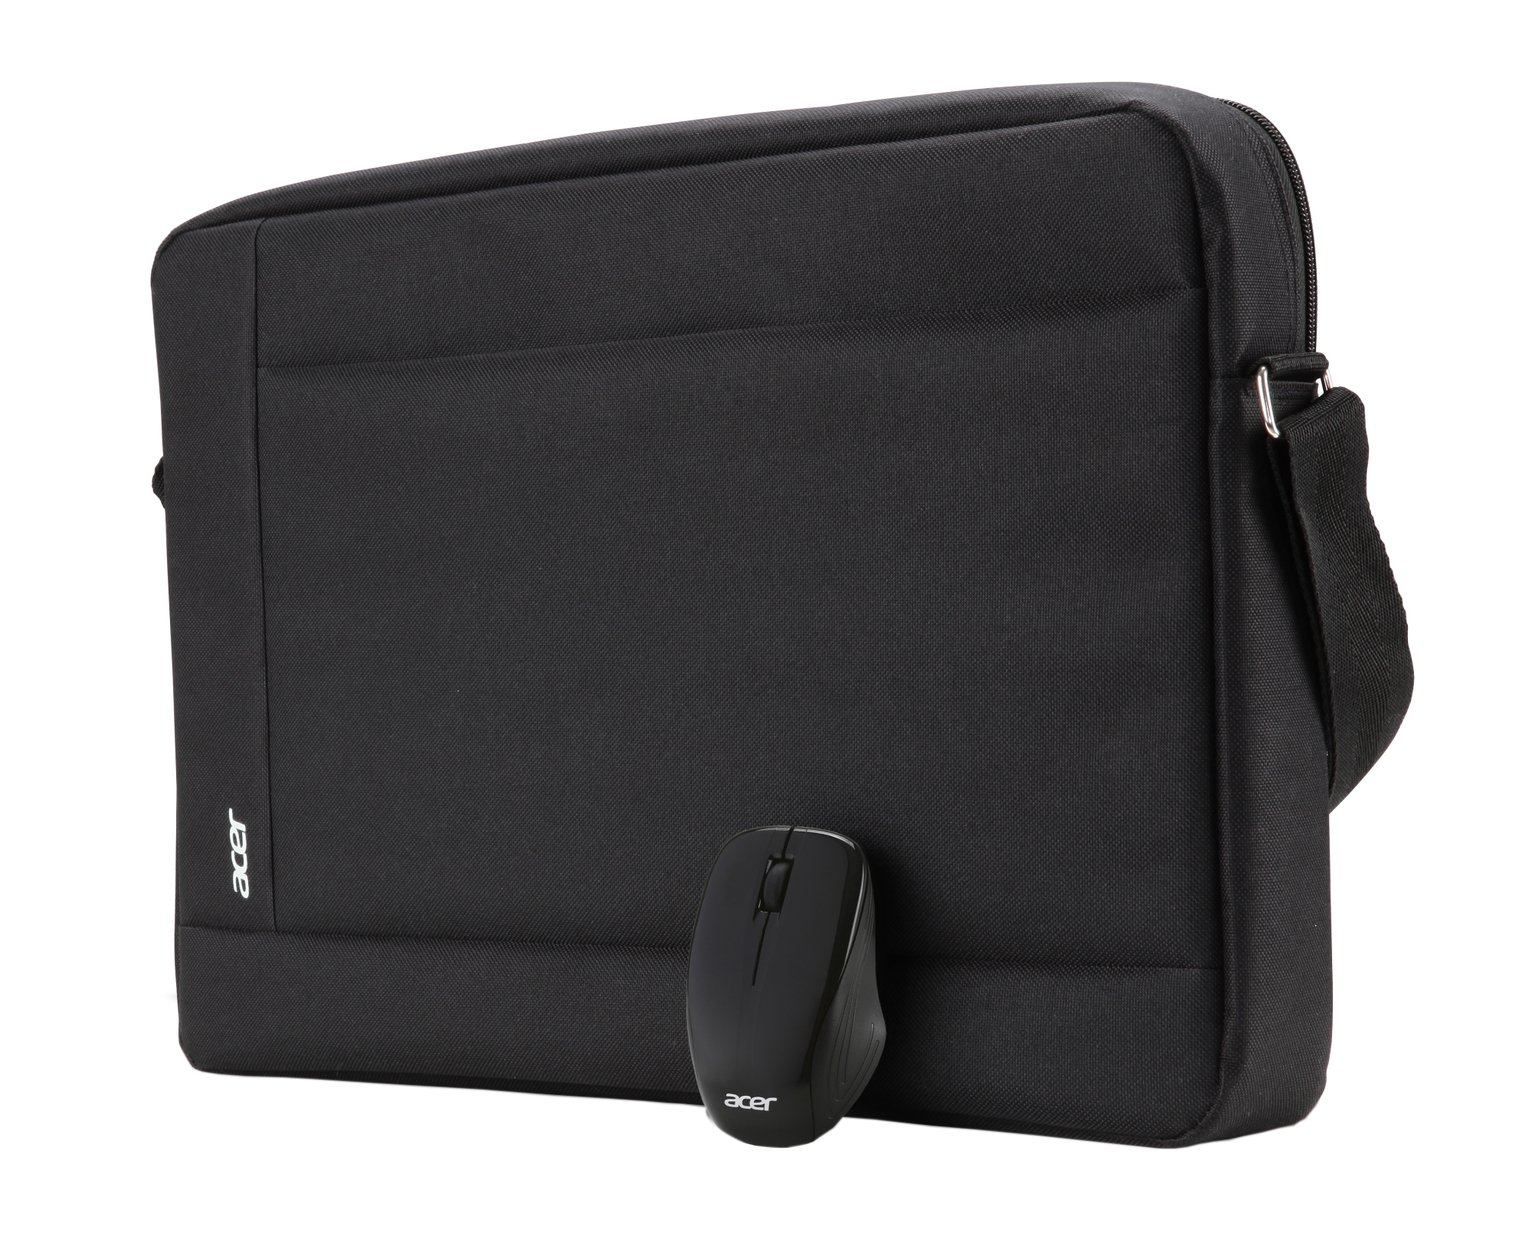 Acer 15.6 Inch Laptop Carry Case and Wireless Mouse - Black